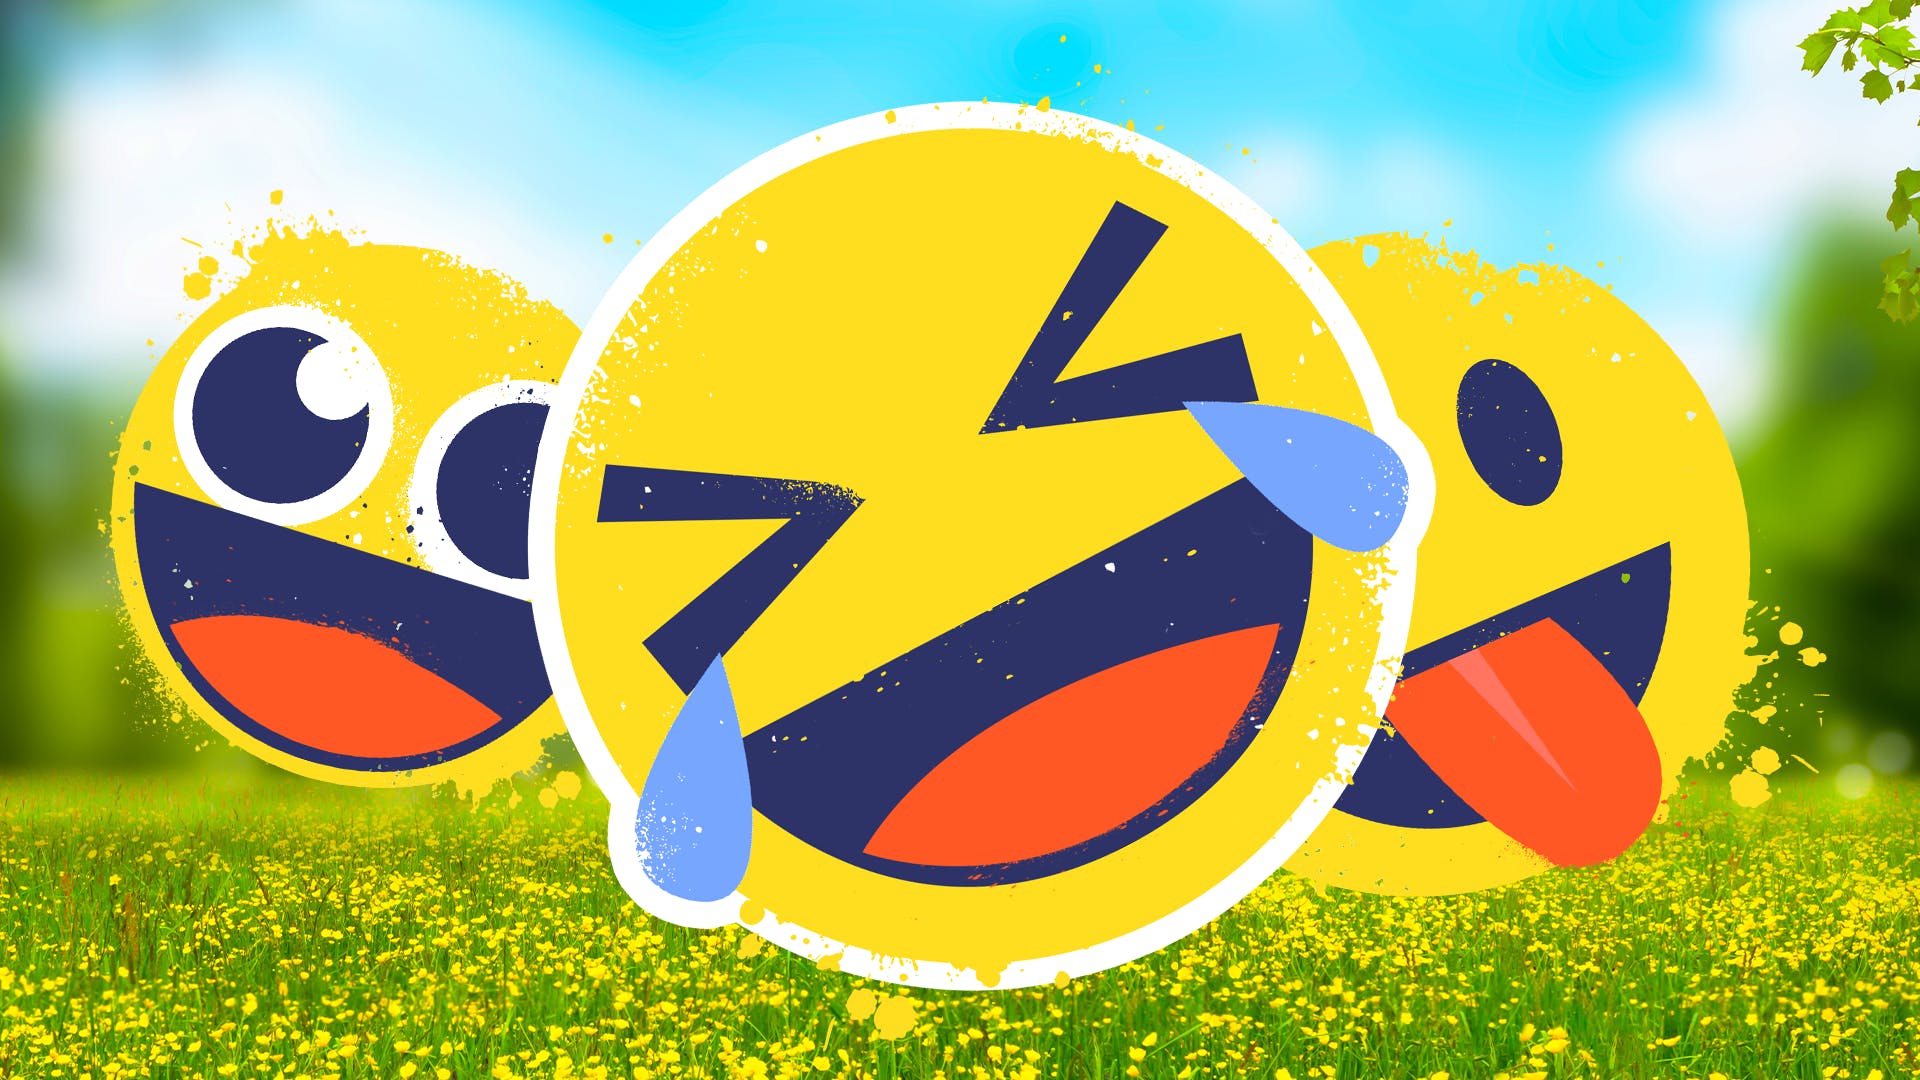 Emojis laughing in a grassy field